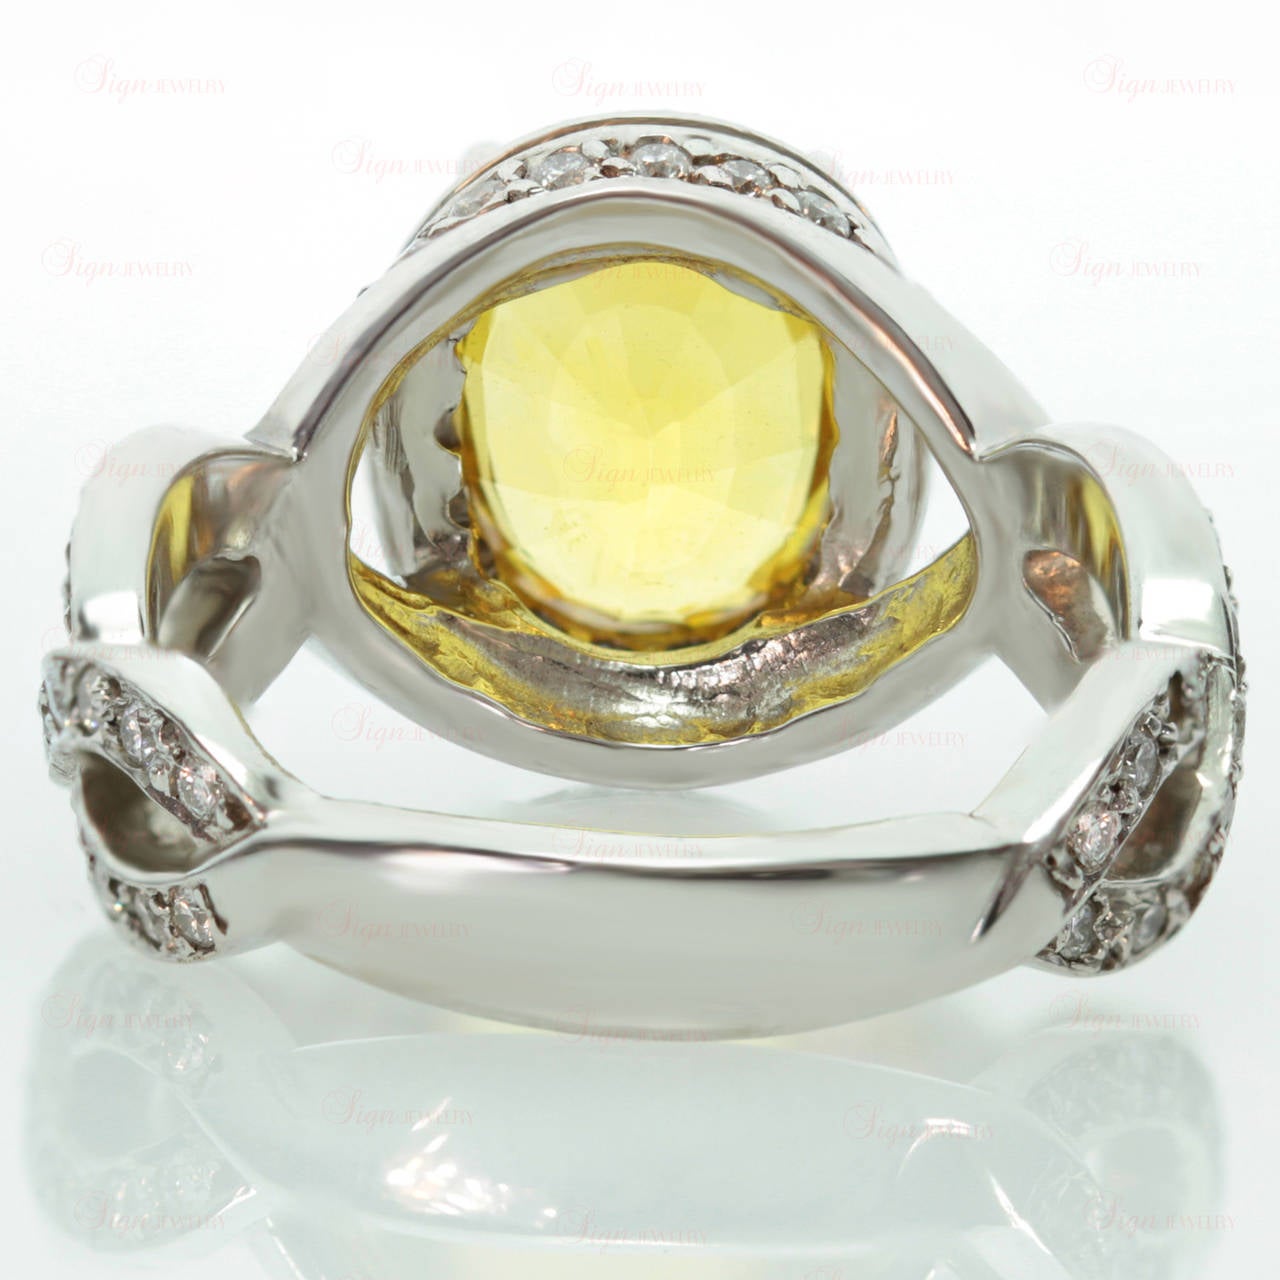 This modern women's cocktail ring is made in 18k white gold and features a natural 3 carat faceted 7.0mm x 10.0mm oval yellow sapphire completed by an estimated 1.25 carats of sparkling pave-set round diamonds. A radiant design. Measurements: 0.43